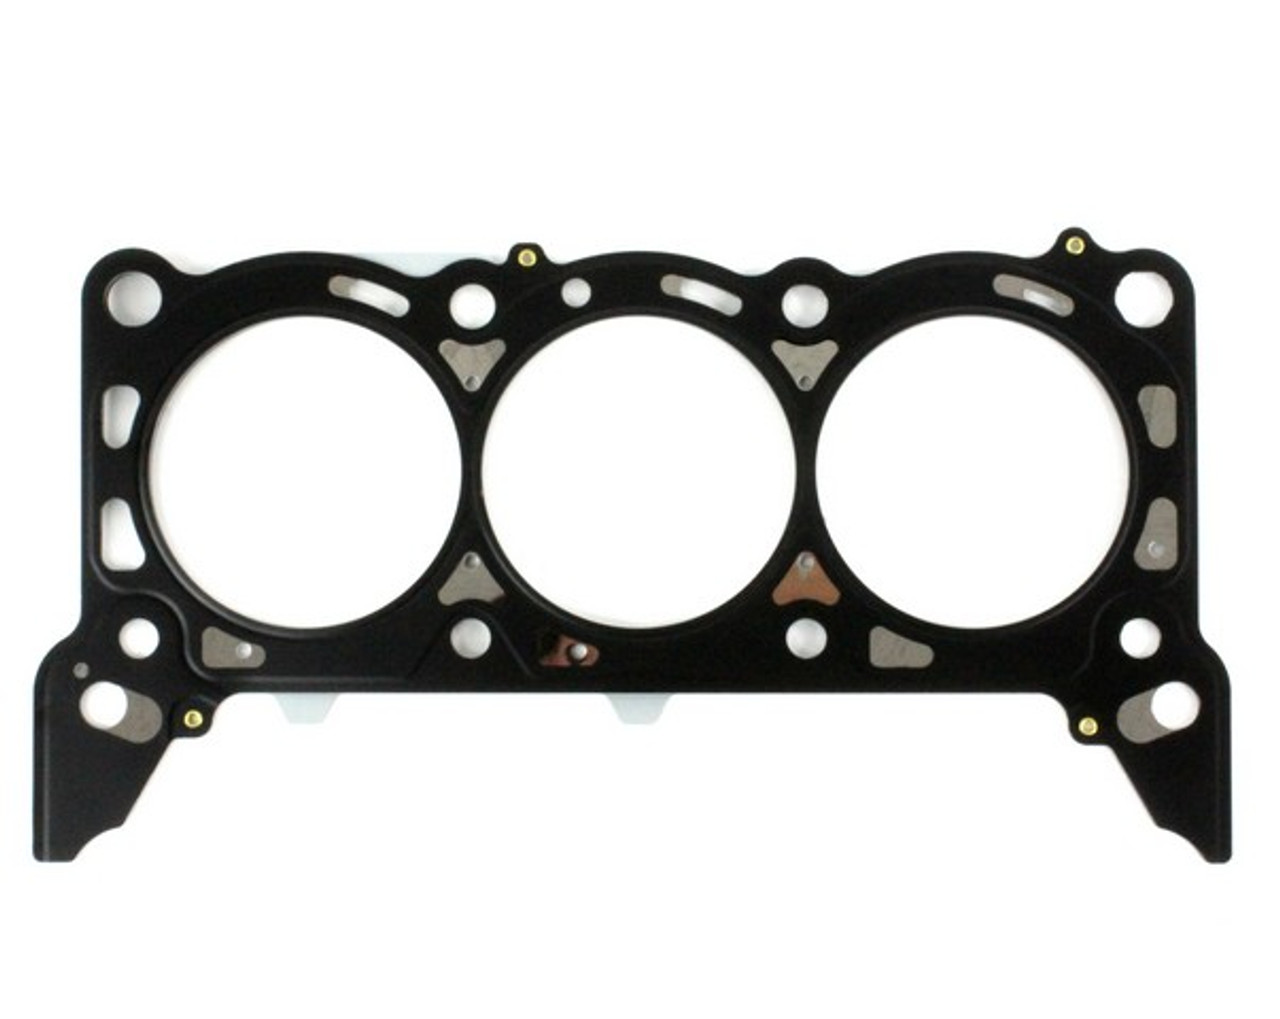 Head Gasket 3.8L 1999 Ford Mustang - HG4123R.43